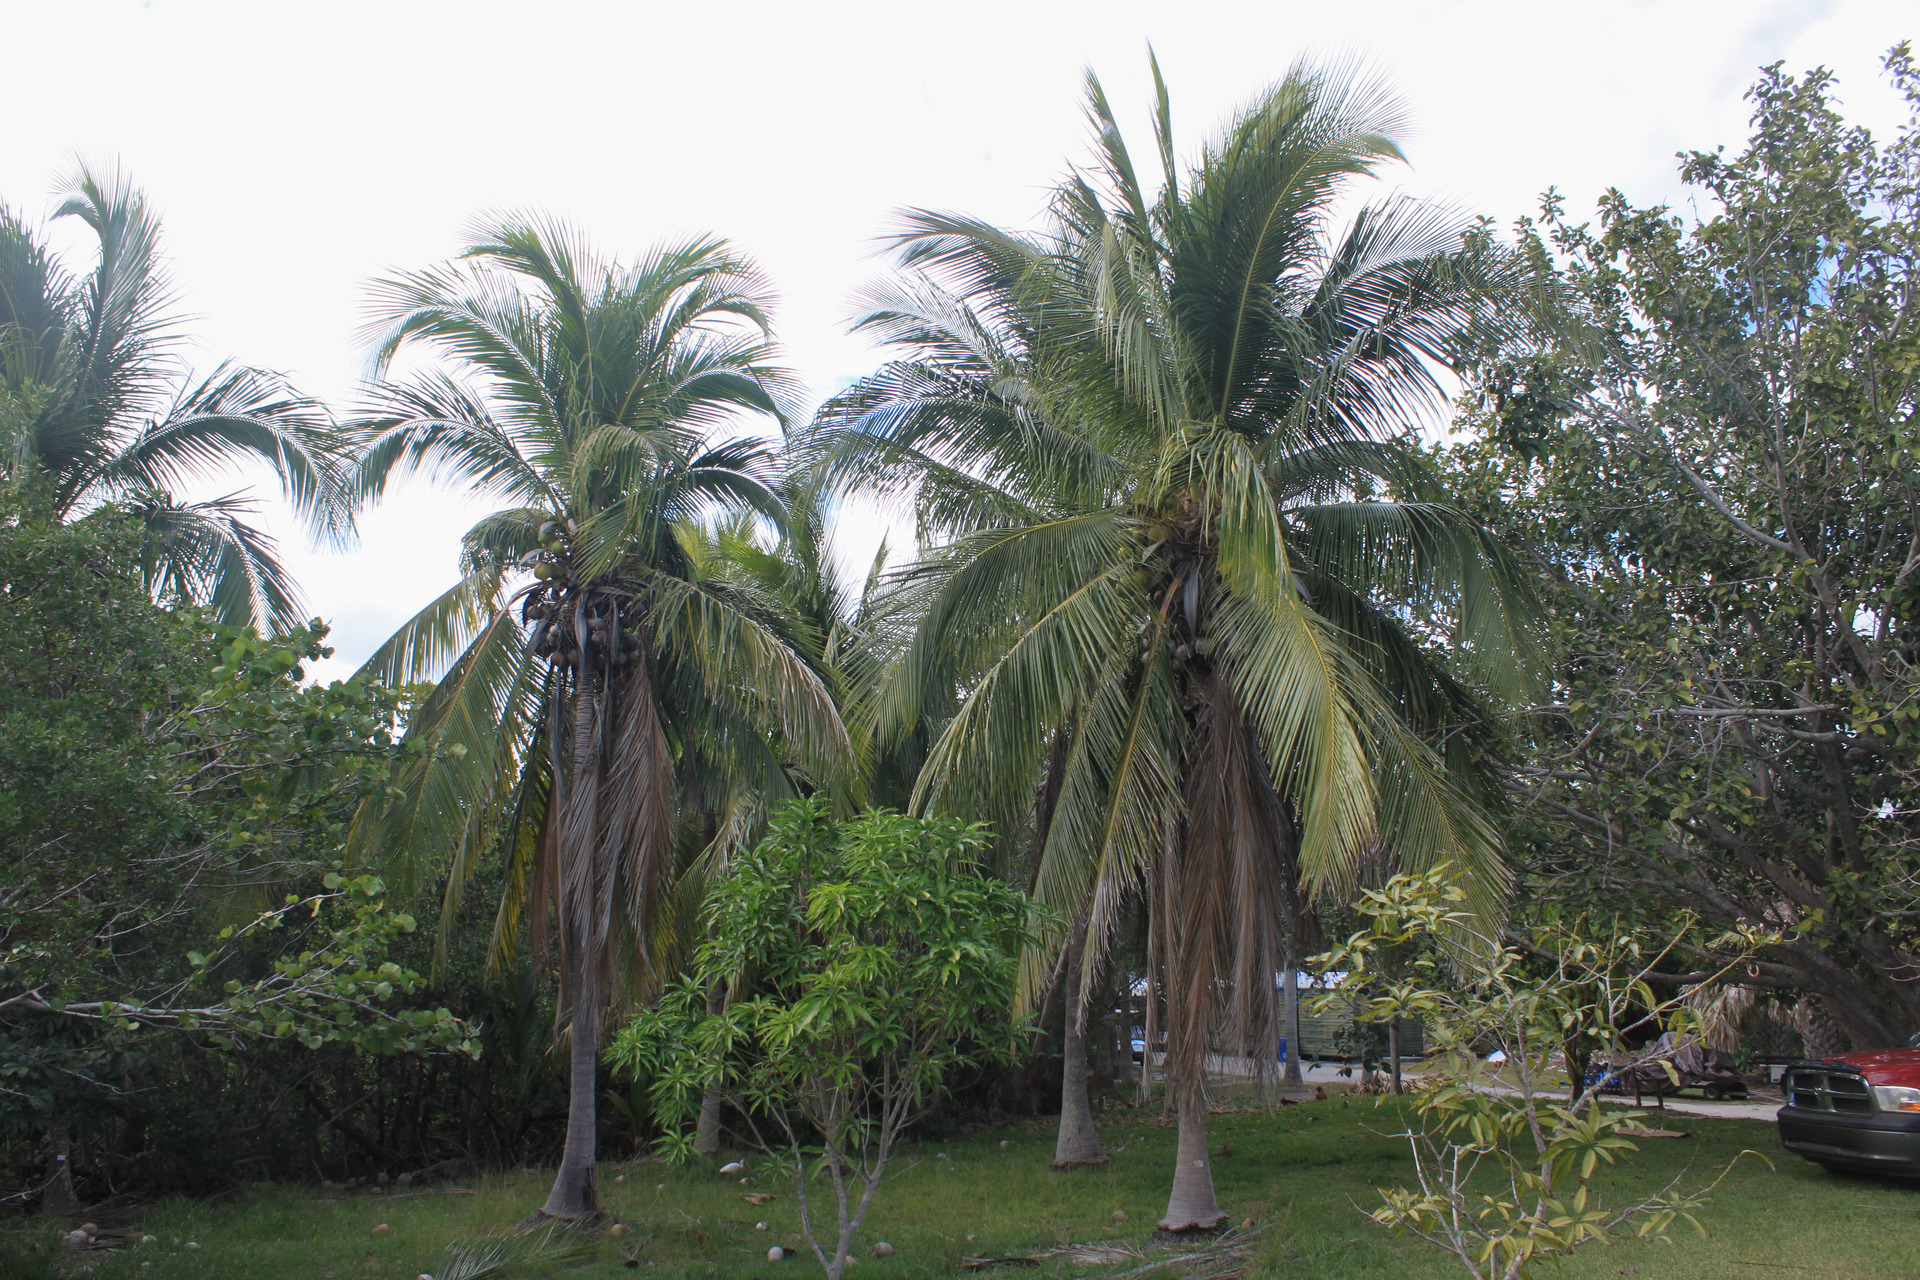 Macapuno coconut - DISCUSSING PALM TREES WORLDWIDE - PalmTalk